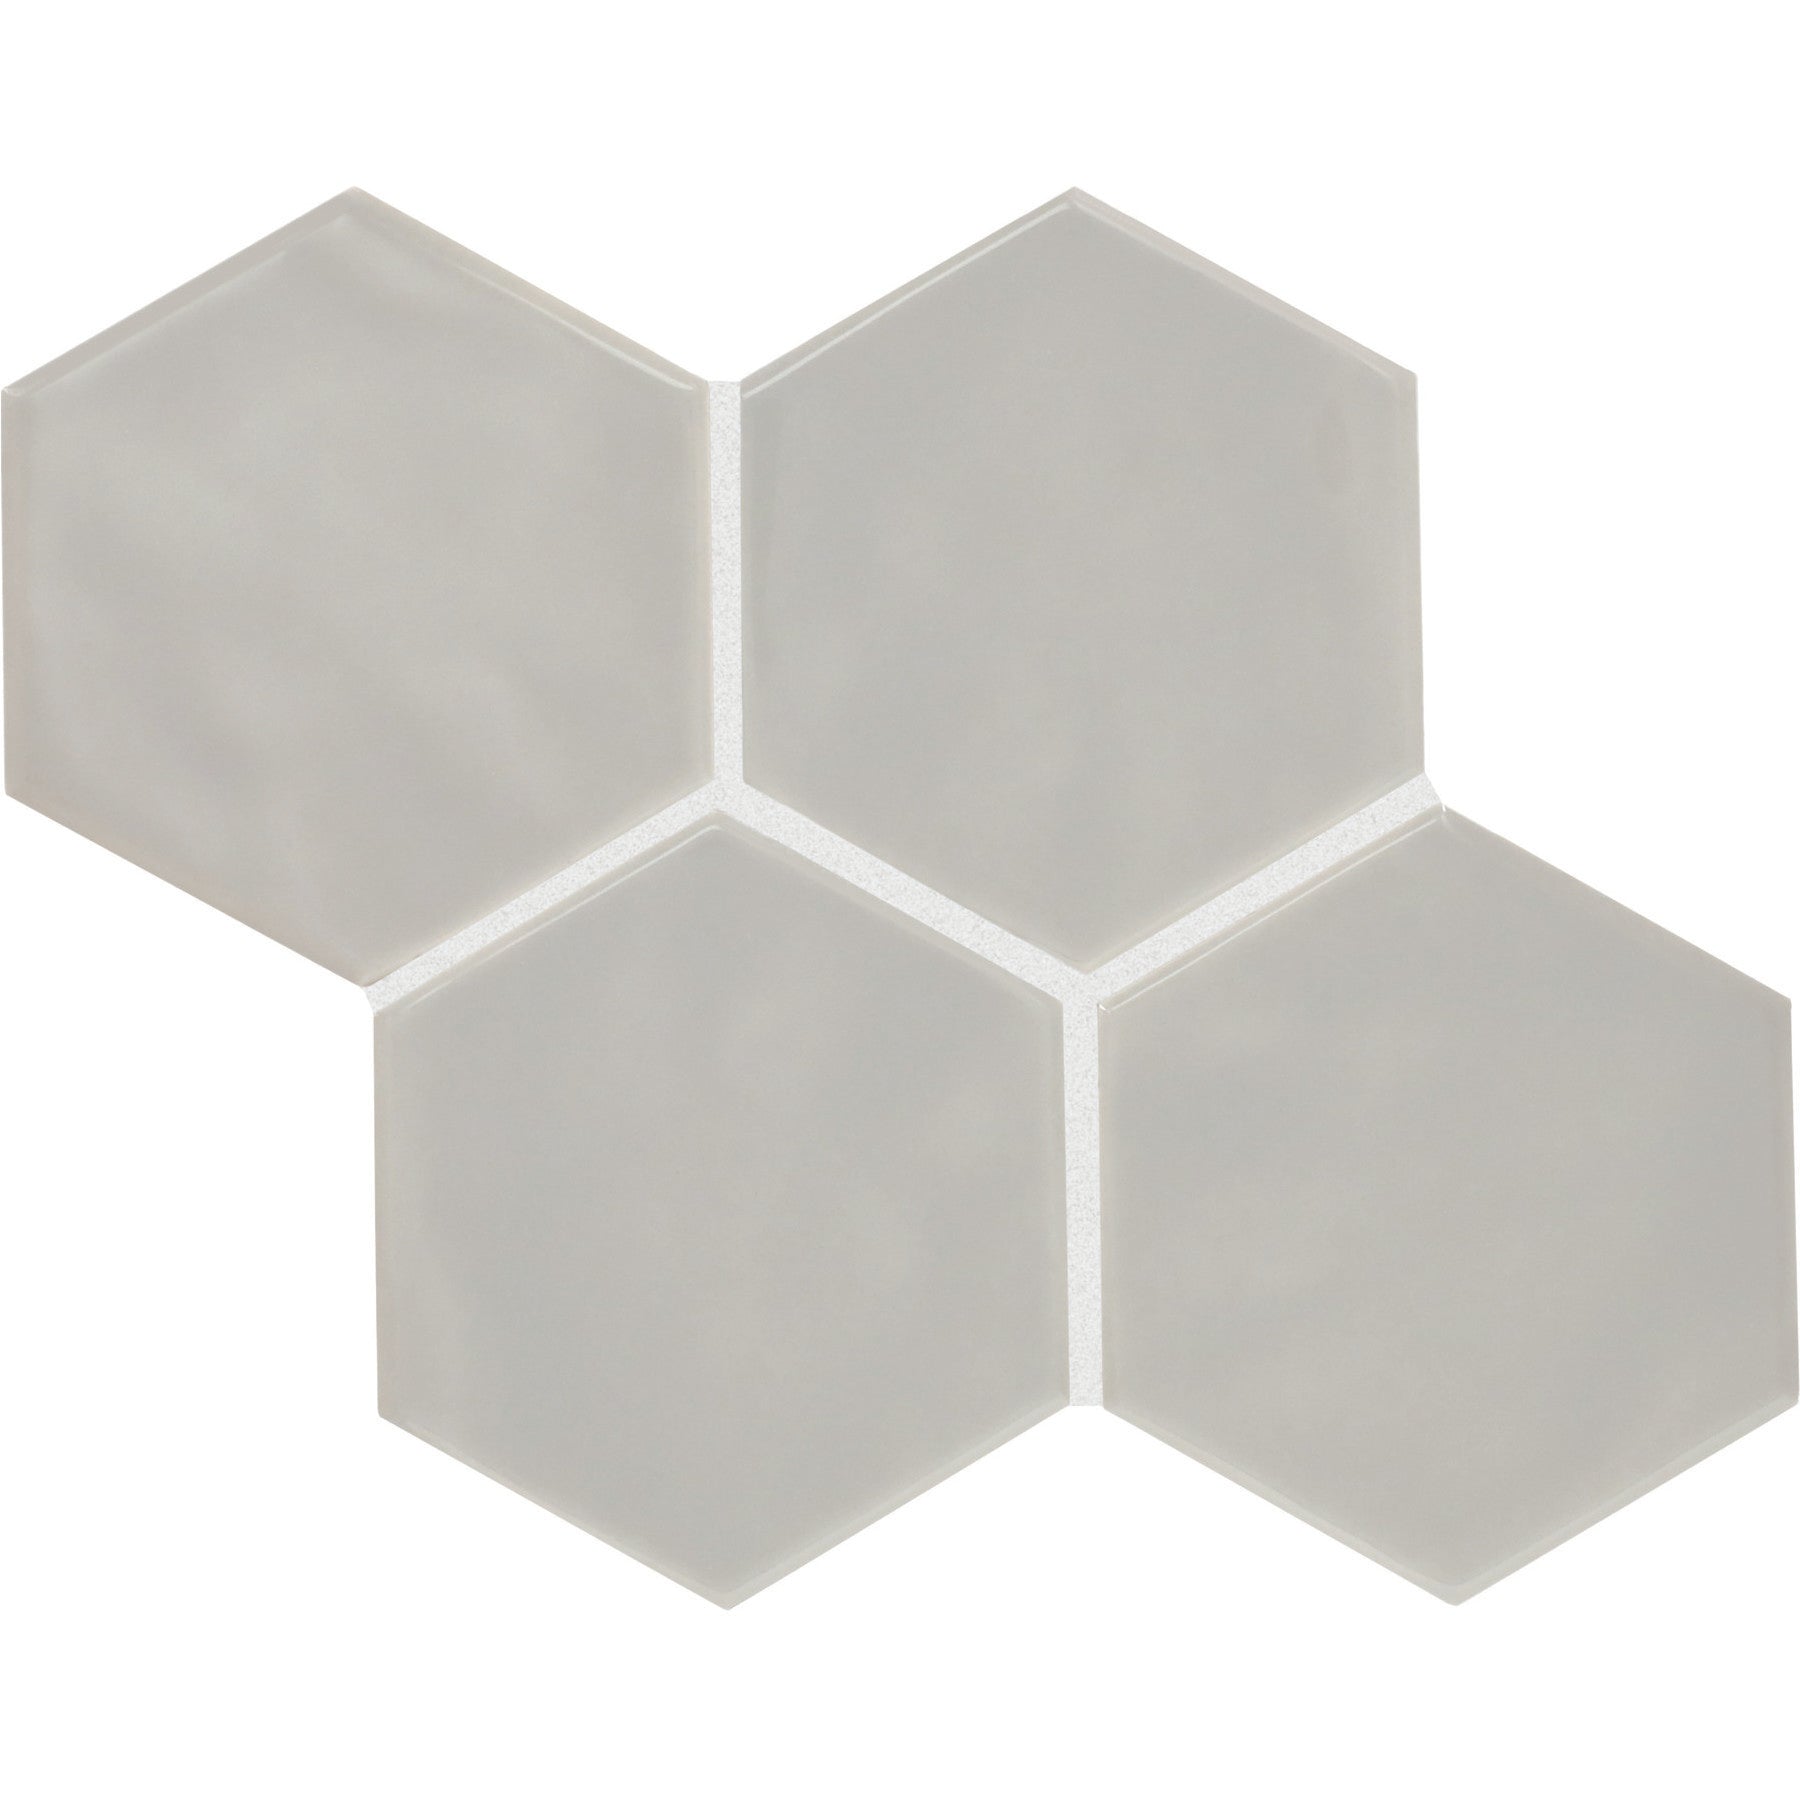 American Olean - Playscapes Hex Wall Tile - Silverside PS73